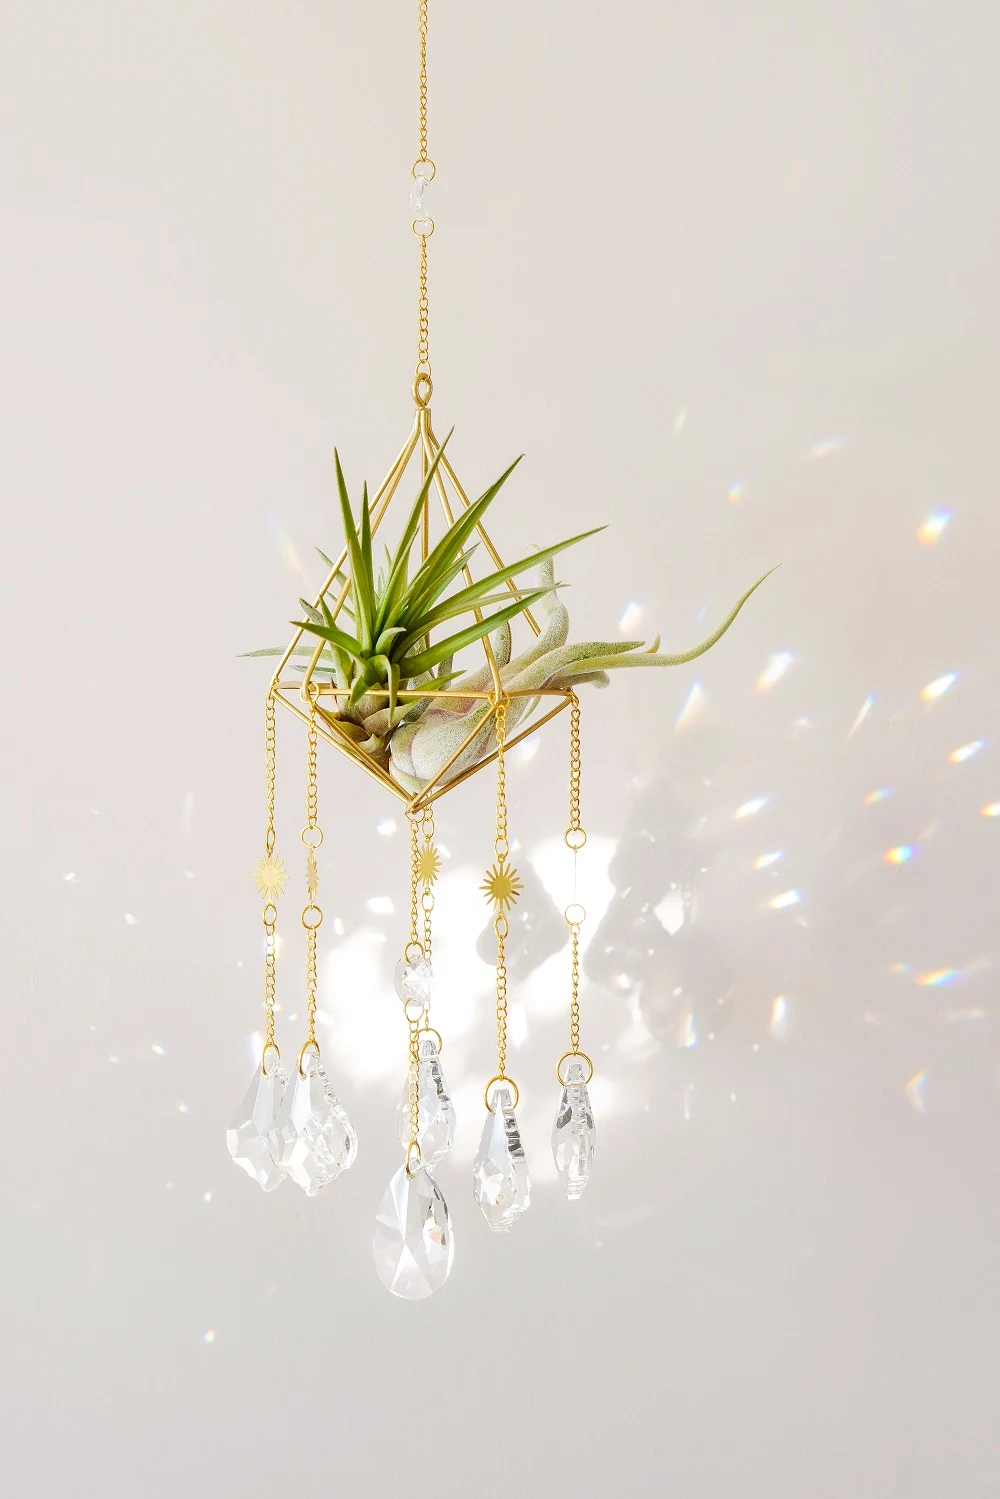 Crystl Airplant Holder by Xander Kostroma